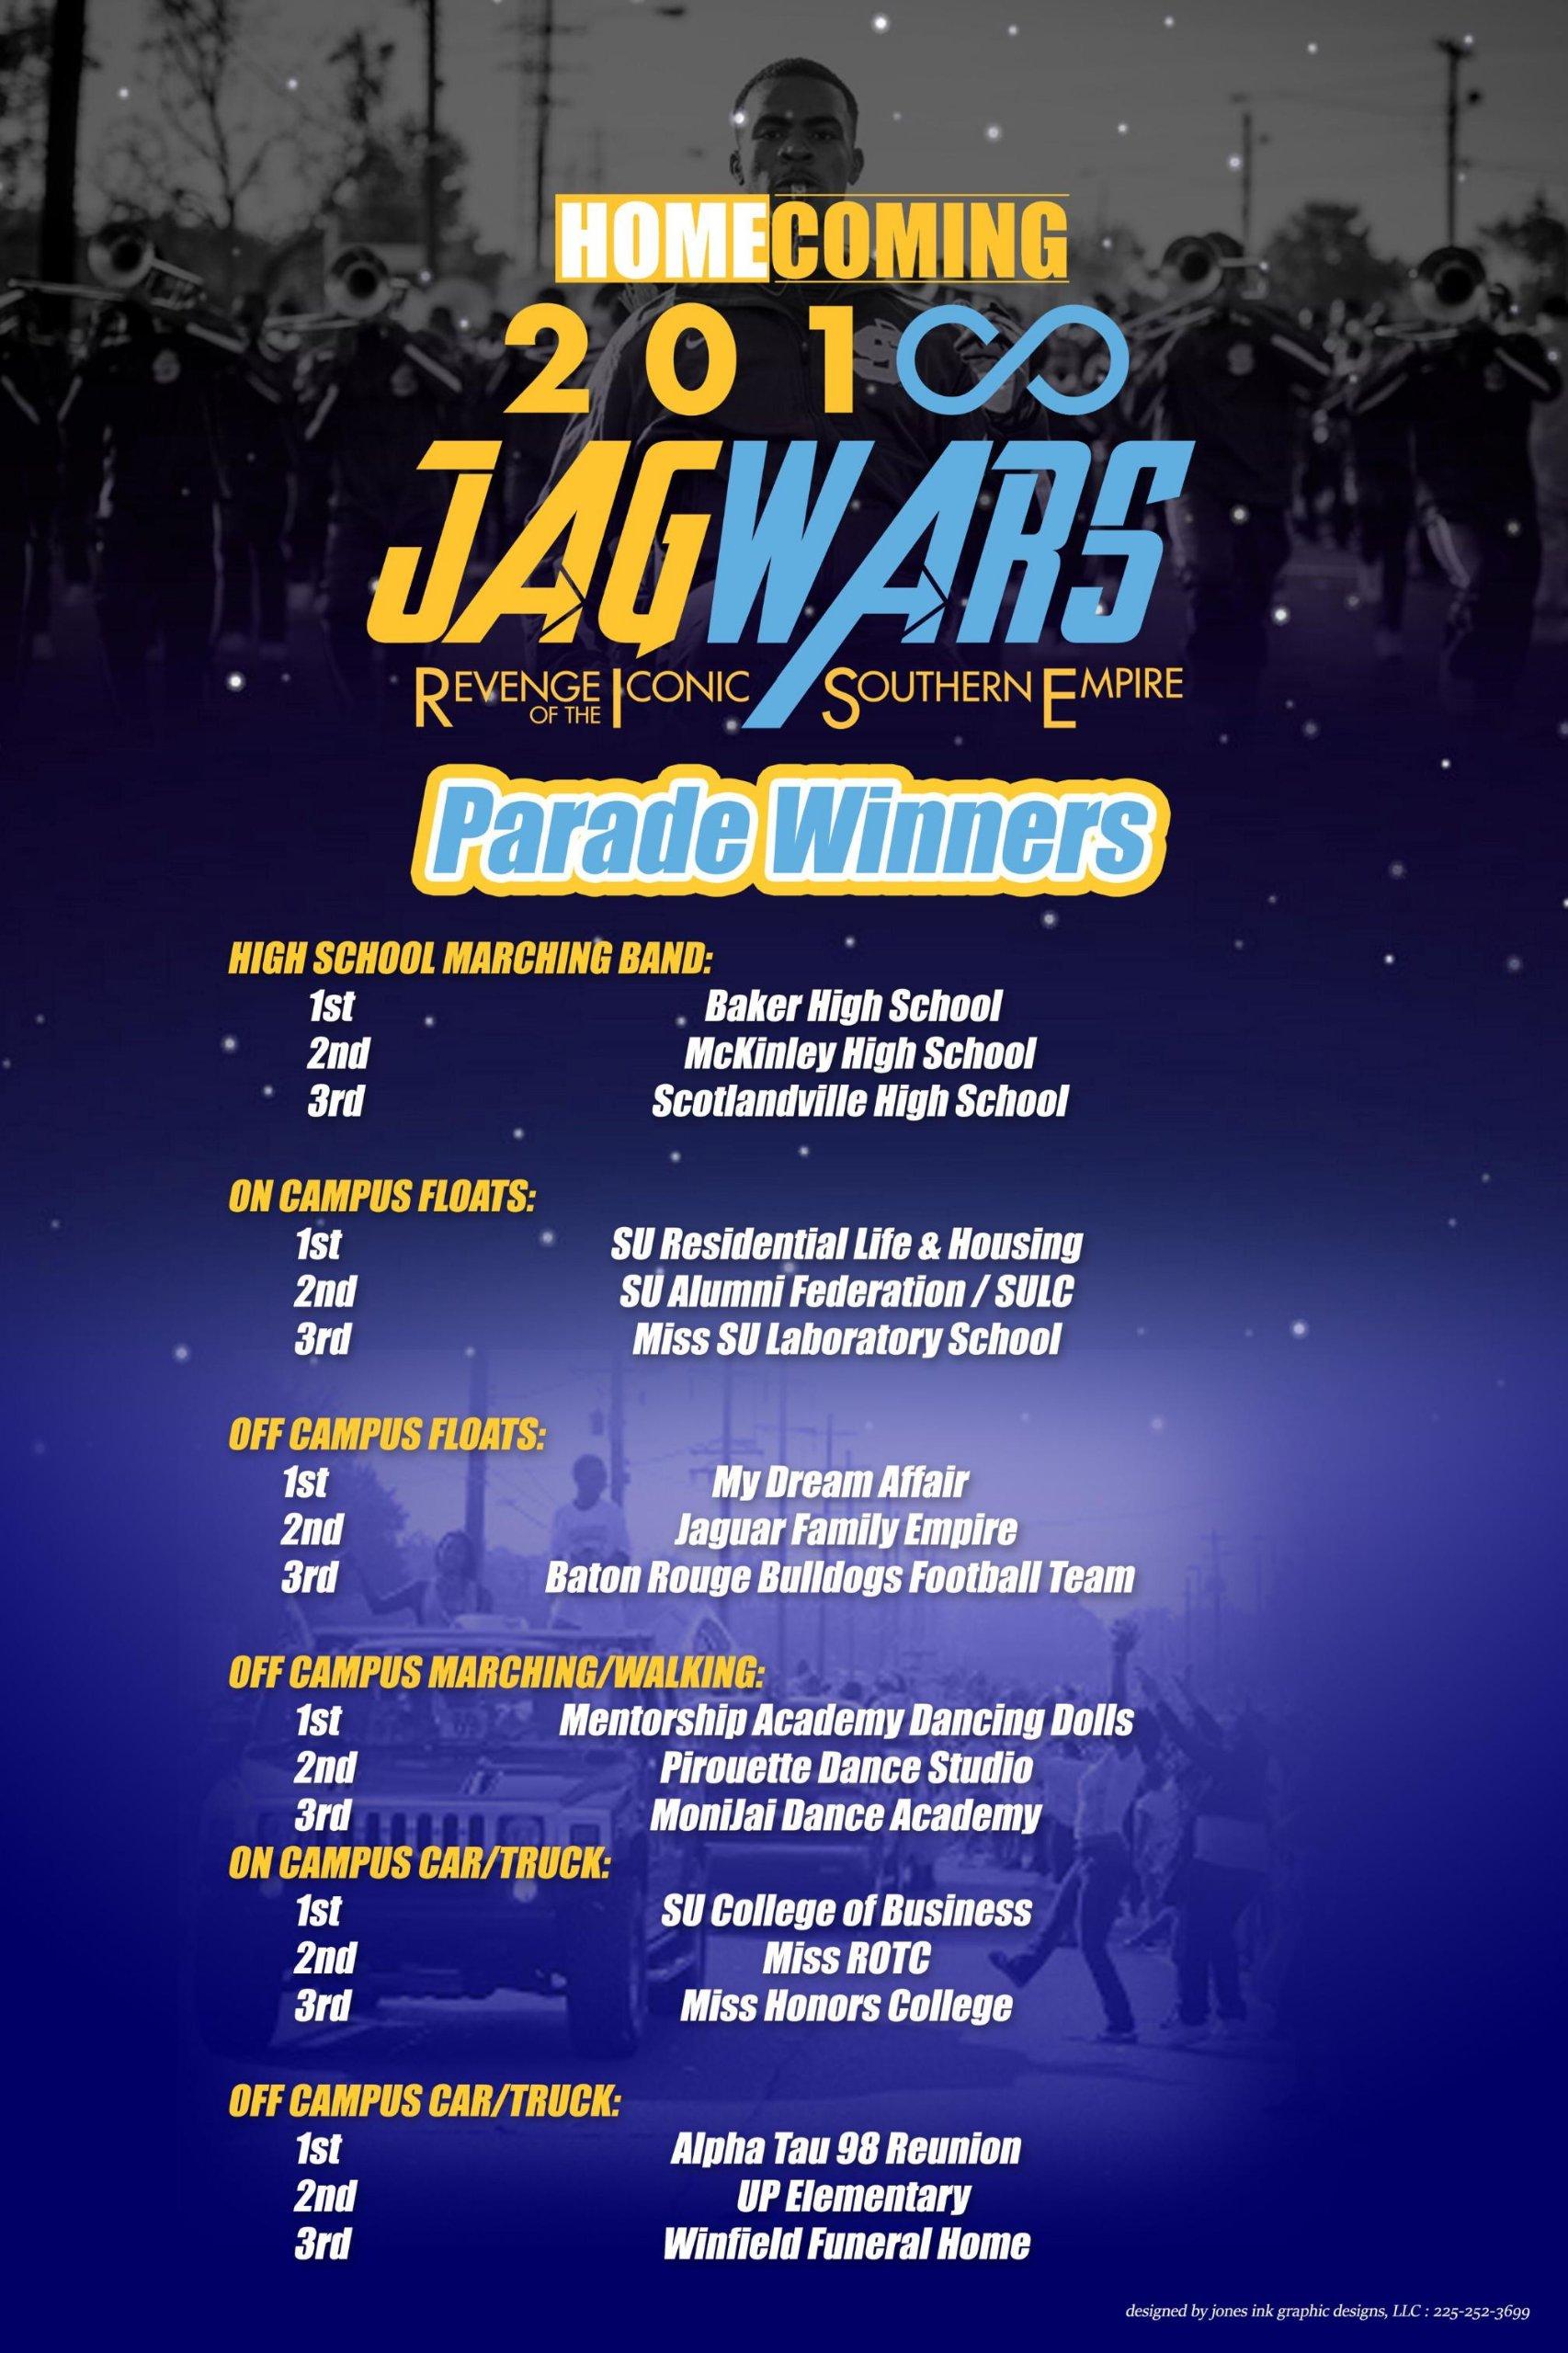 a poster from Southern University JagWars Parade Contest. It listed winners in certain categories